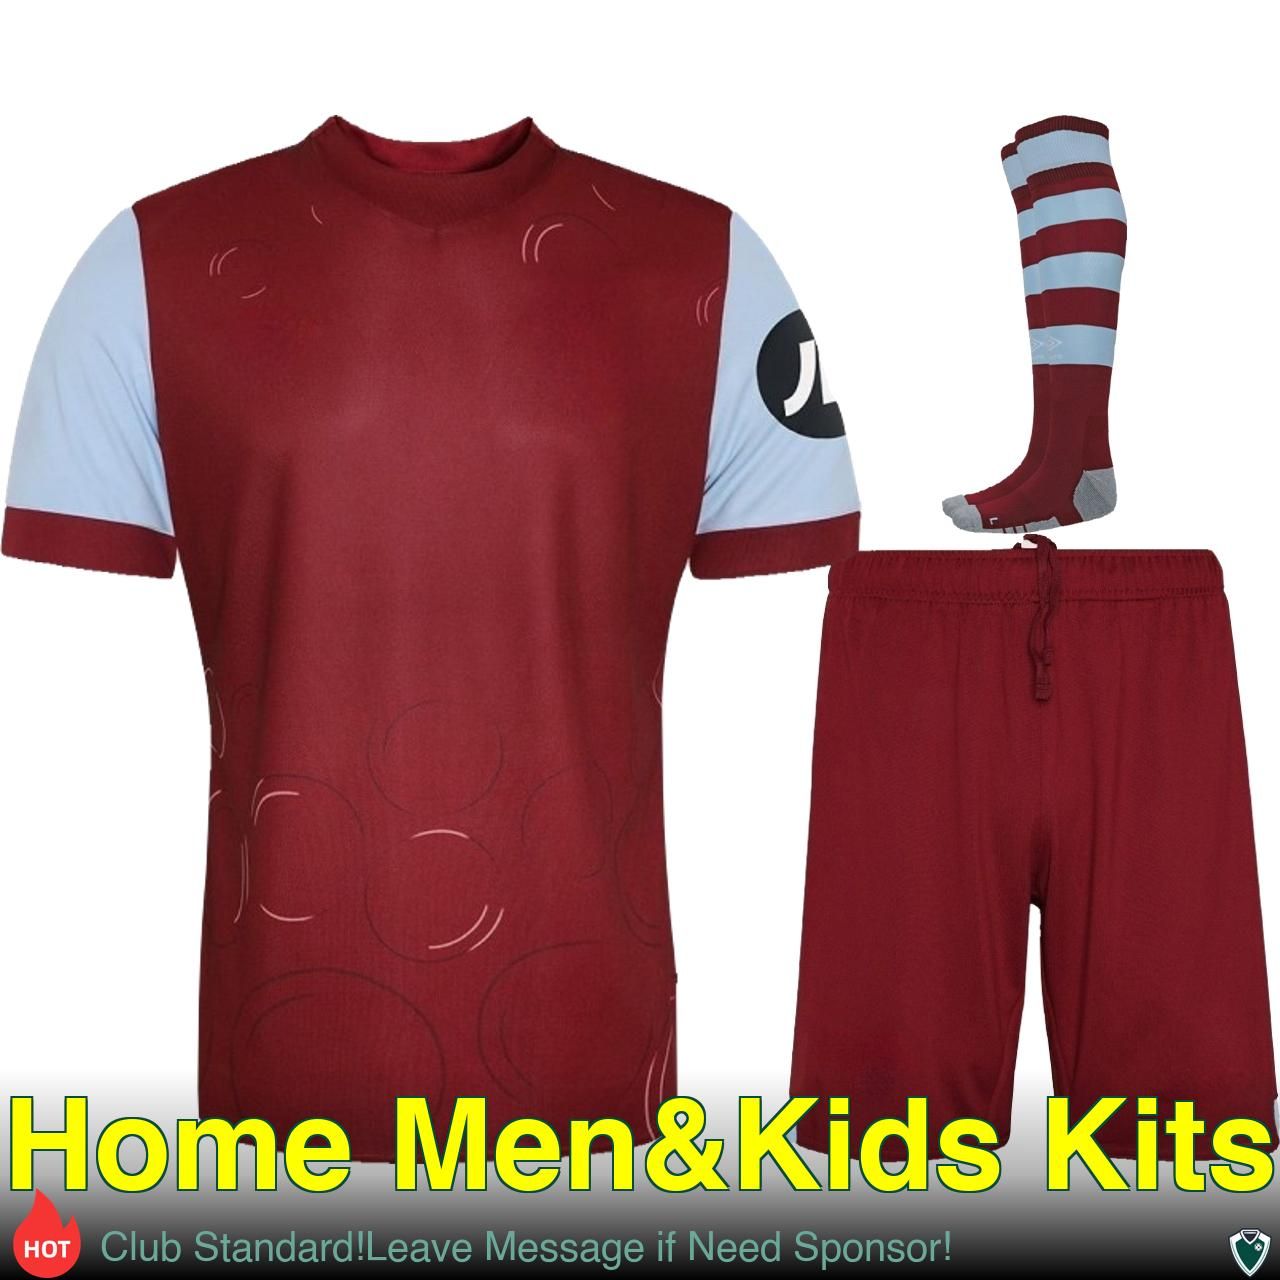 Home Fans Kits